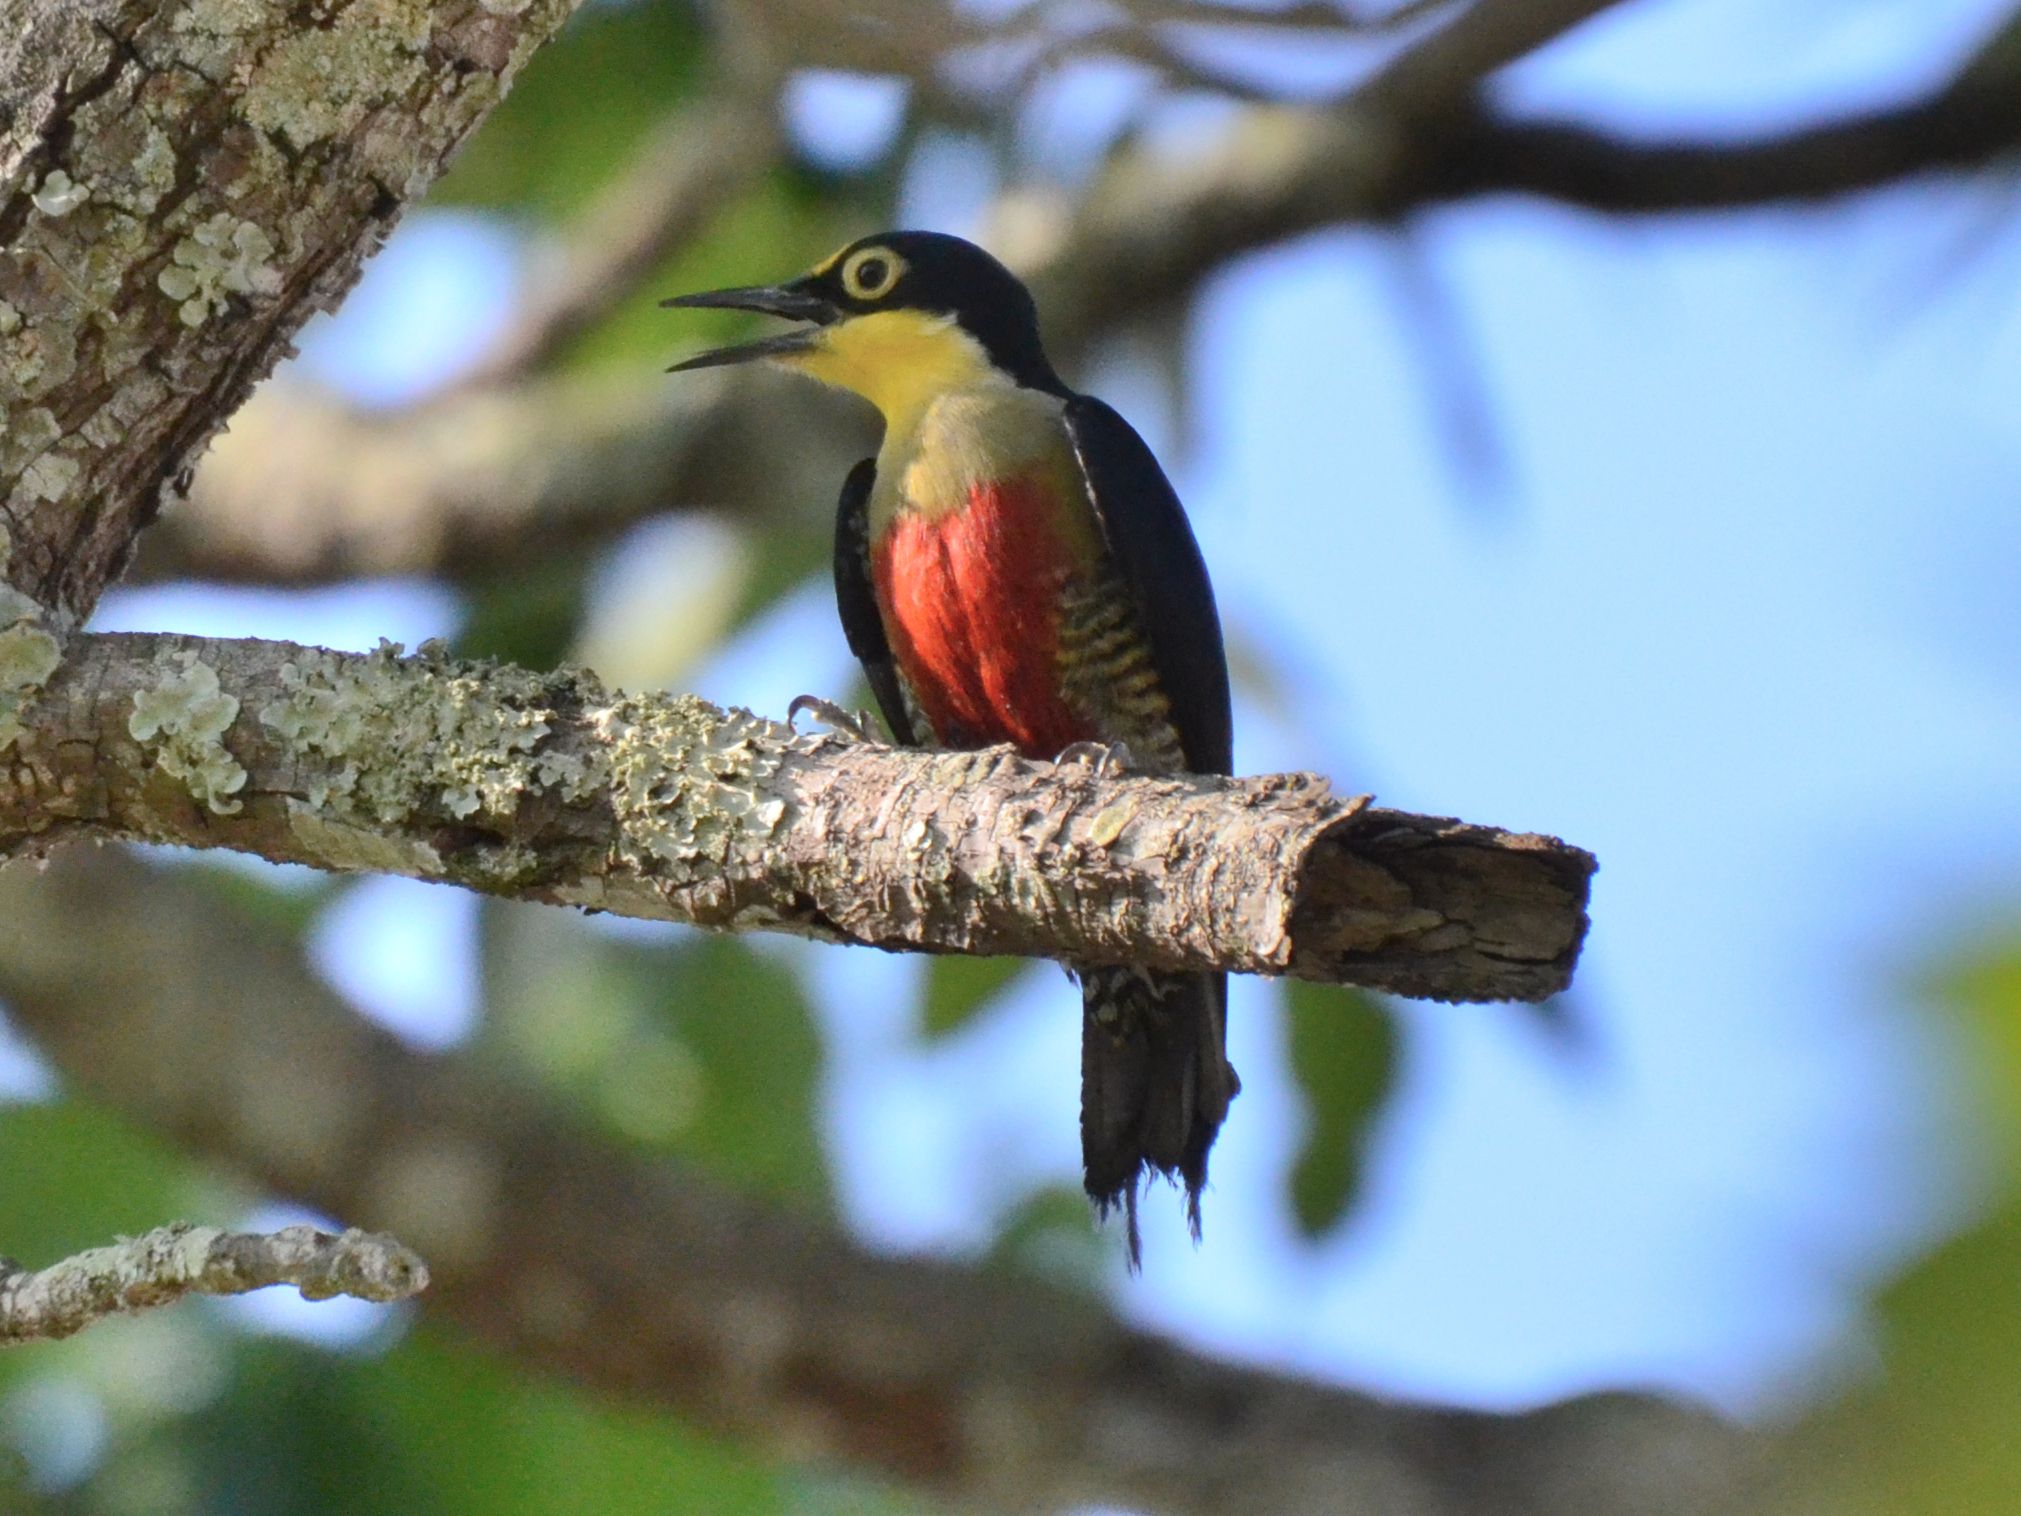 Click picture to see more Yellow-fronted Woodpeckers.